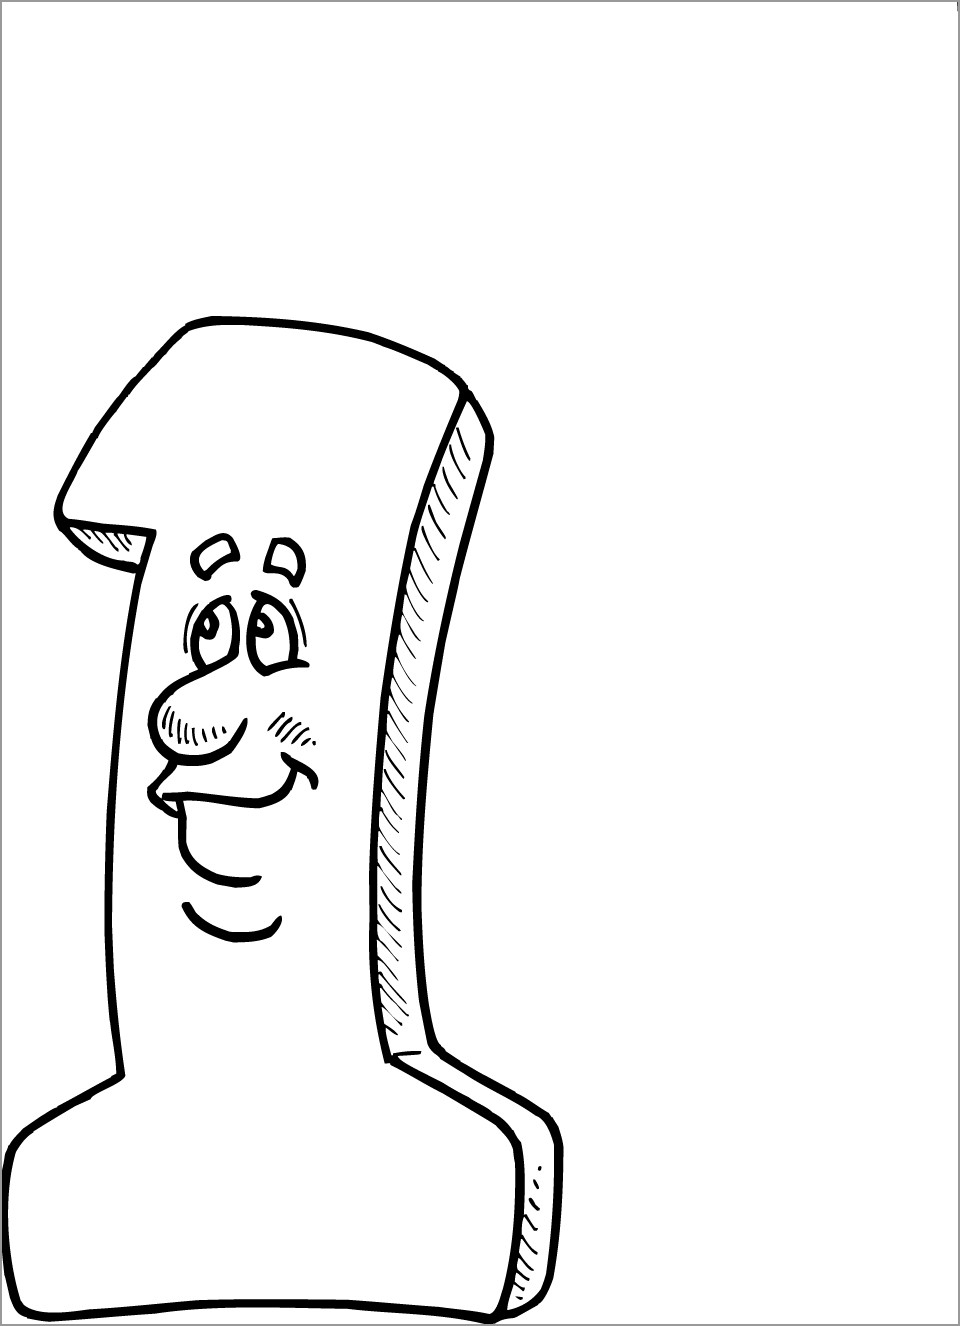 Cartoon Number 1 Coloring Page